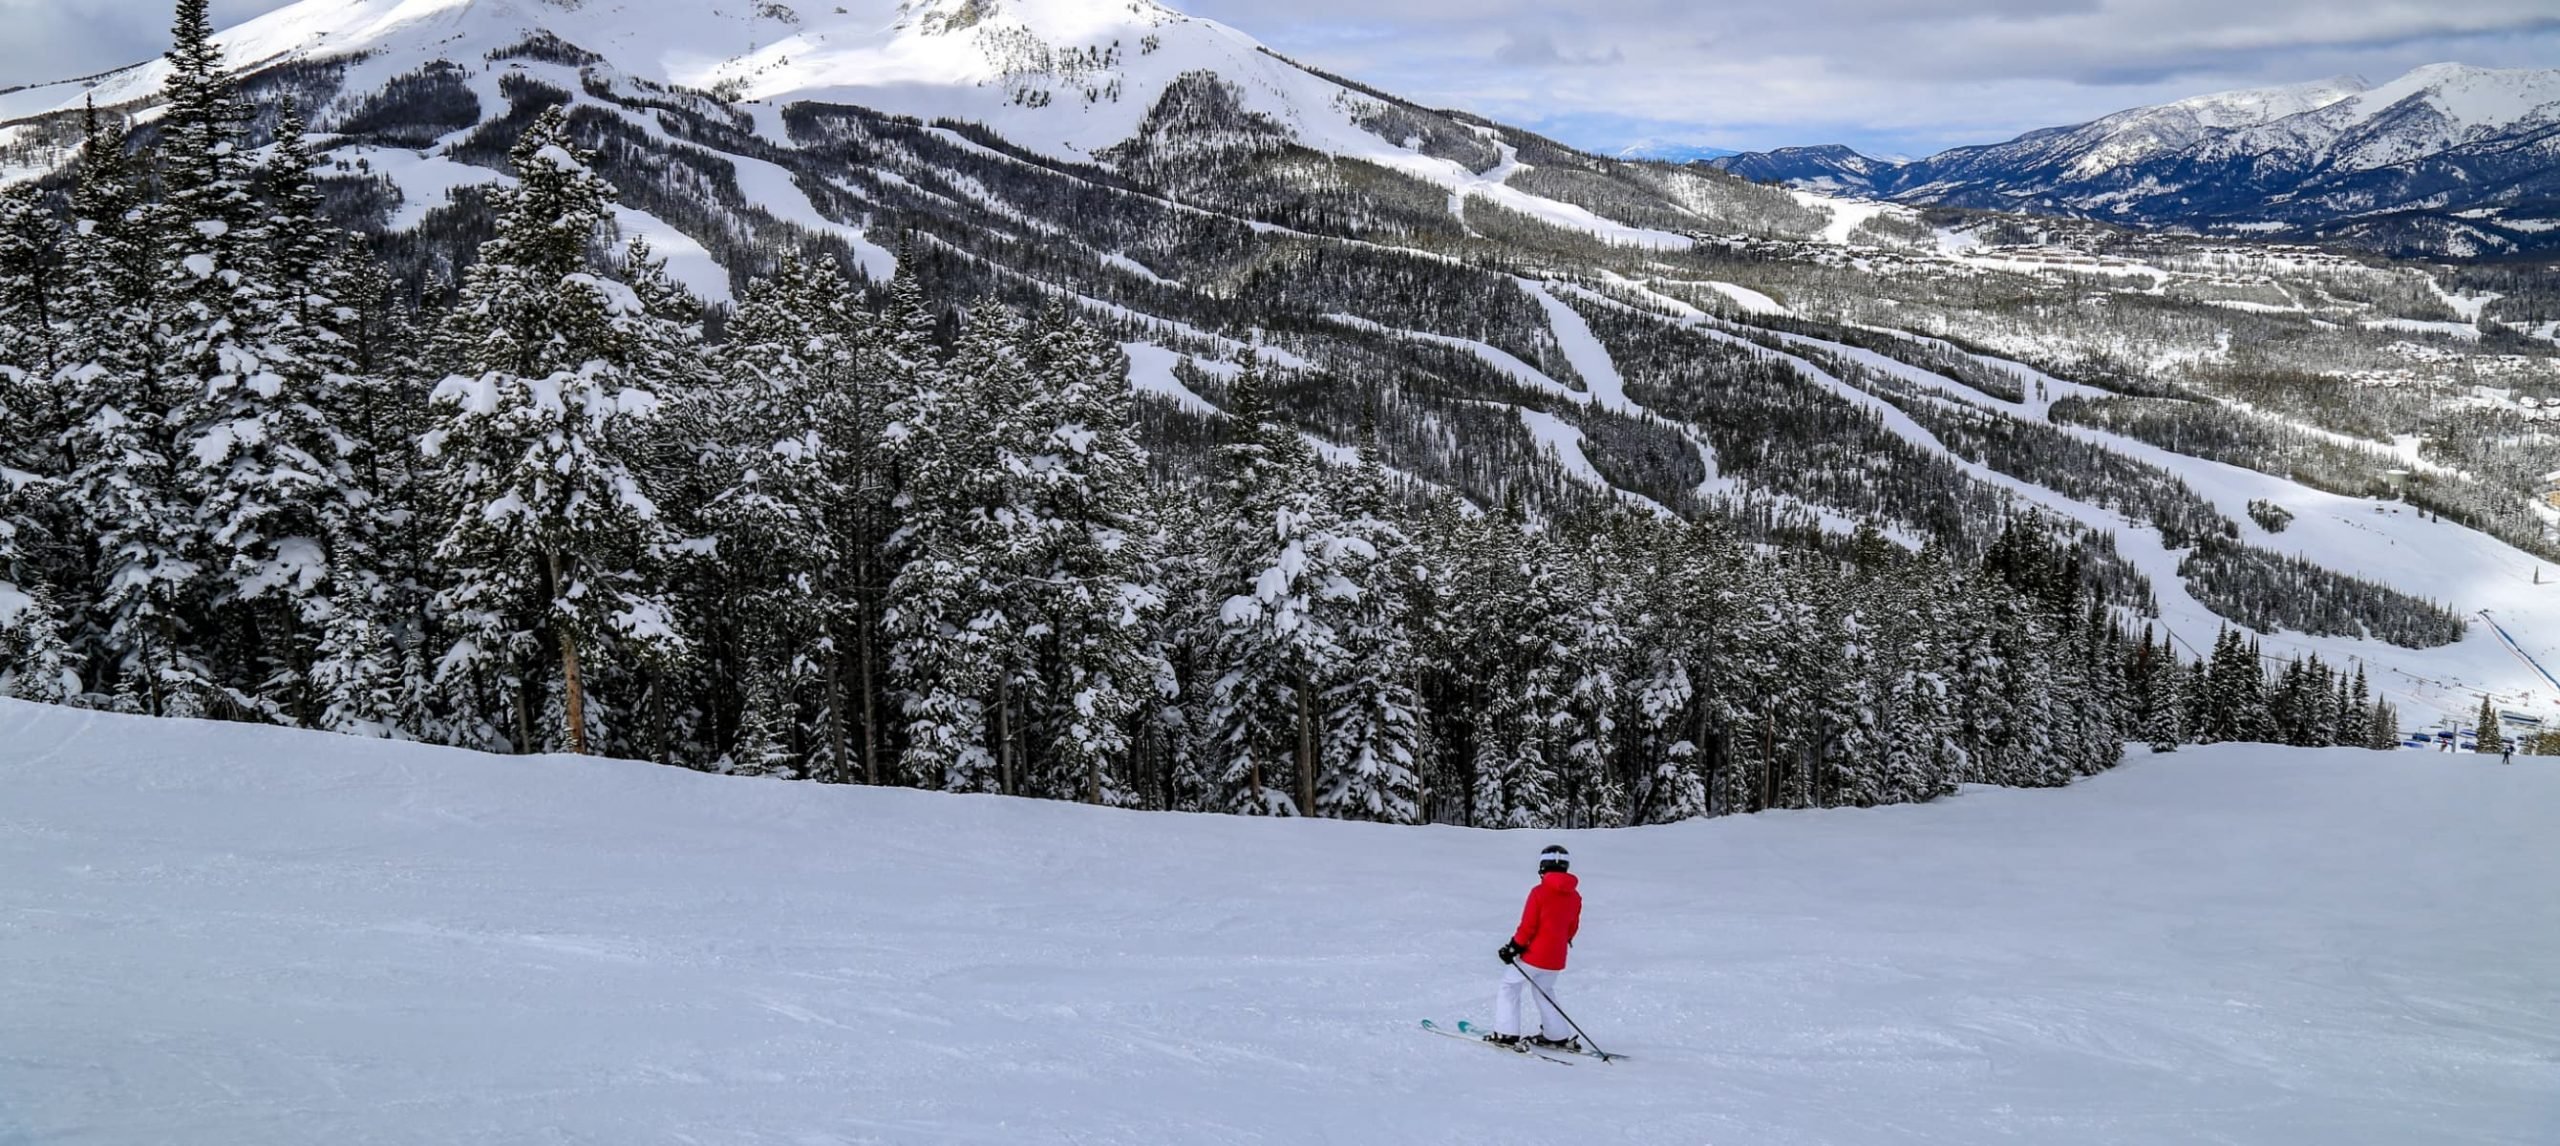 The 7 Best Ski Resorts In The U.S. post thumbnail image